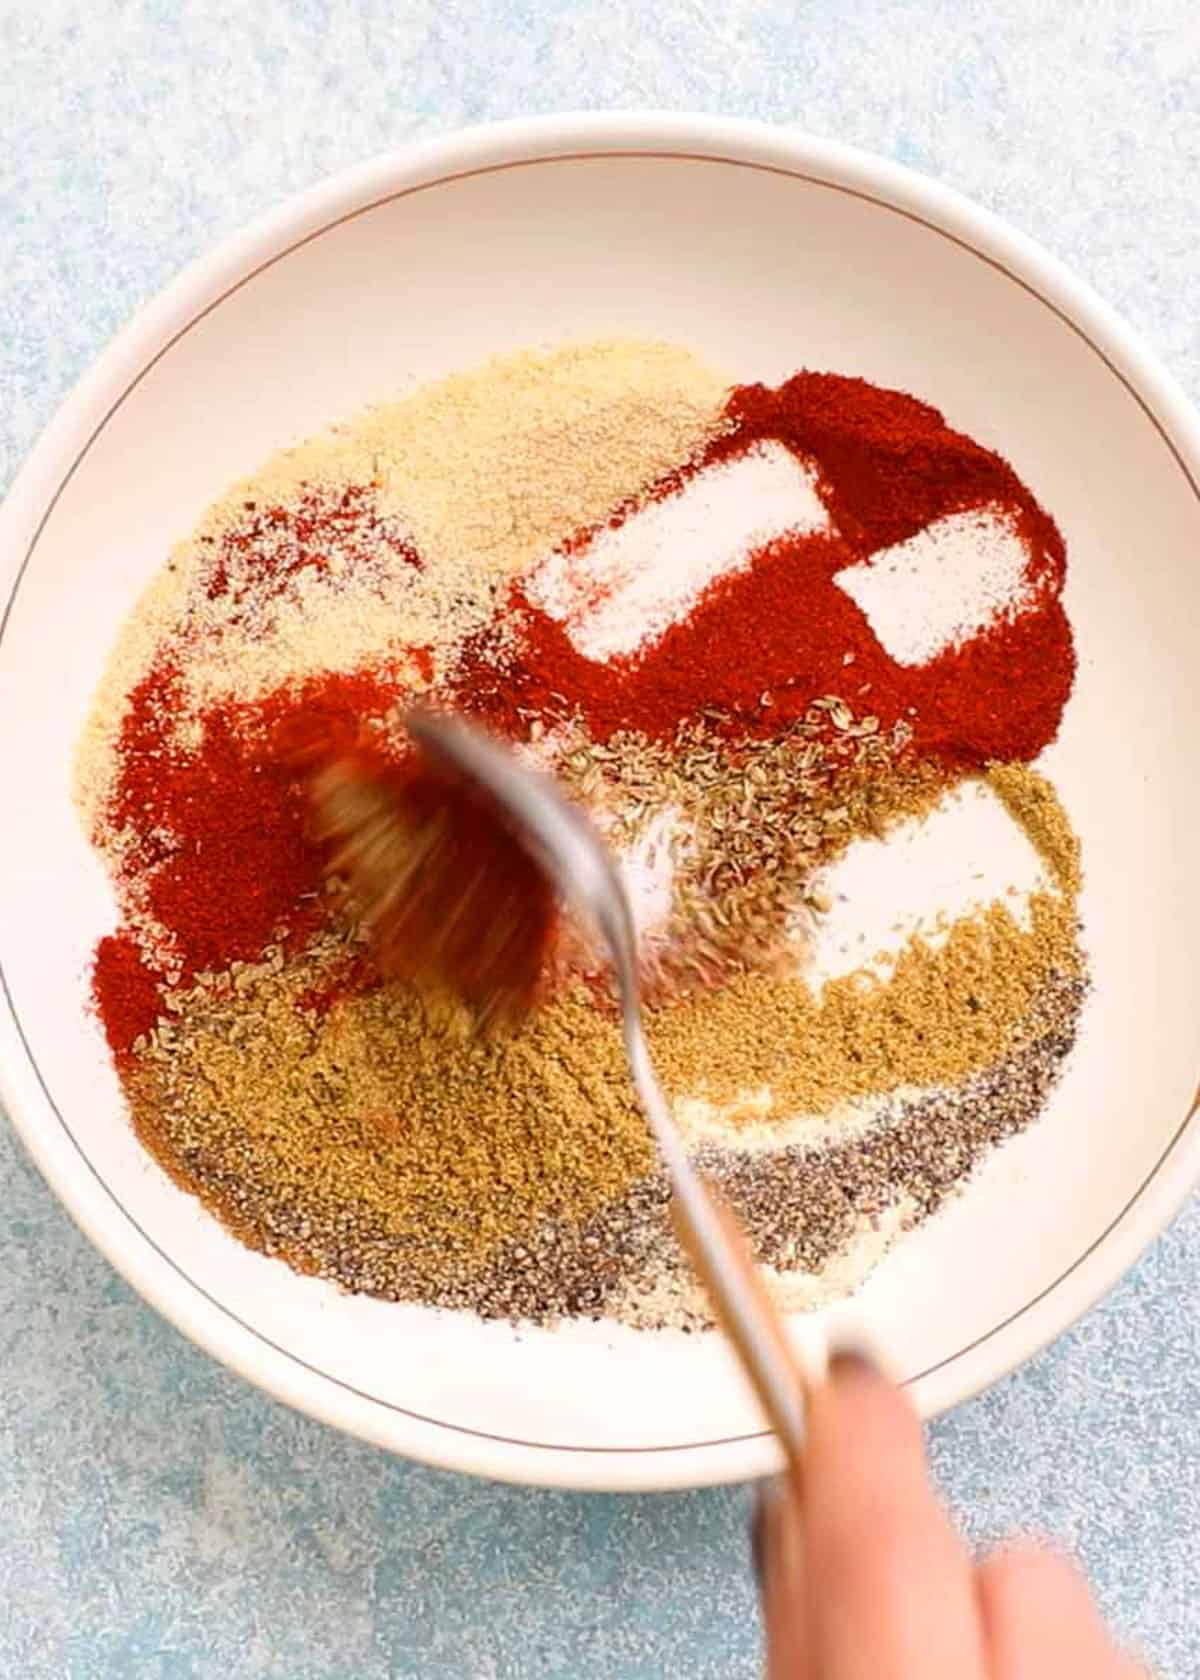 a hand stirring ground spices in a white plate.